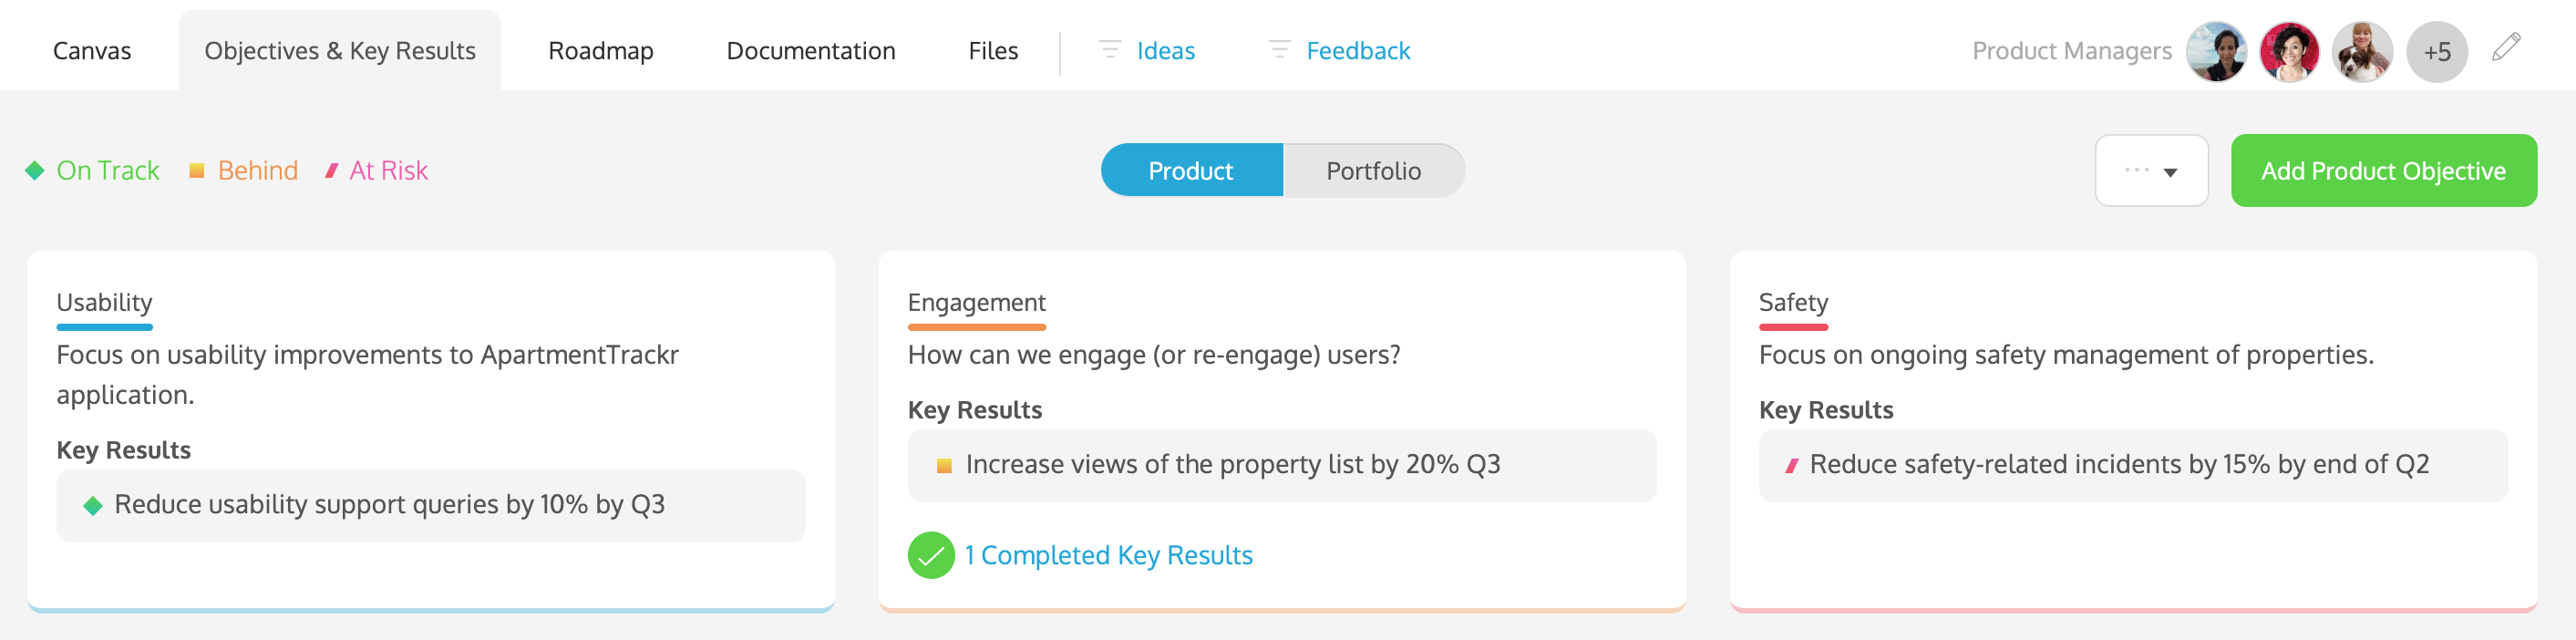 Key Results in ProdPad track against your Objectives and your roadmap Initiatives